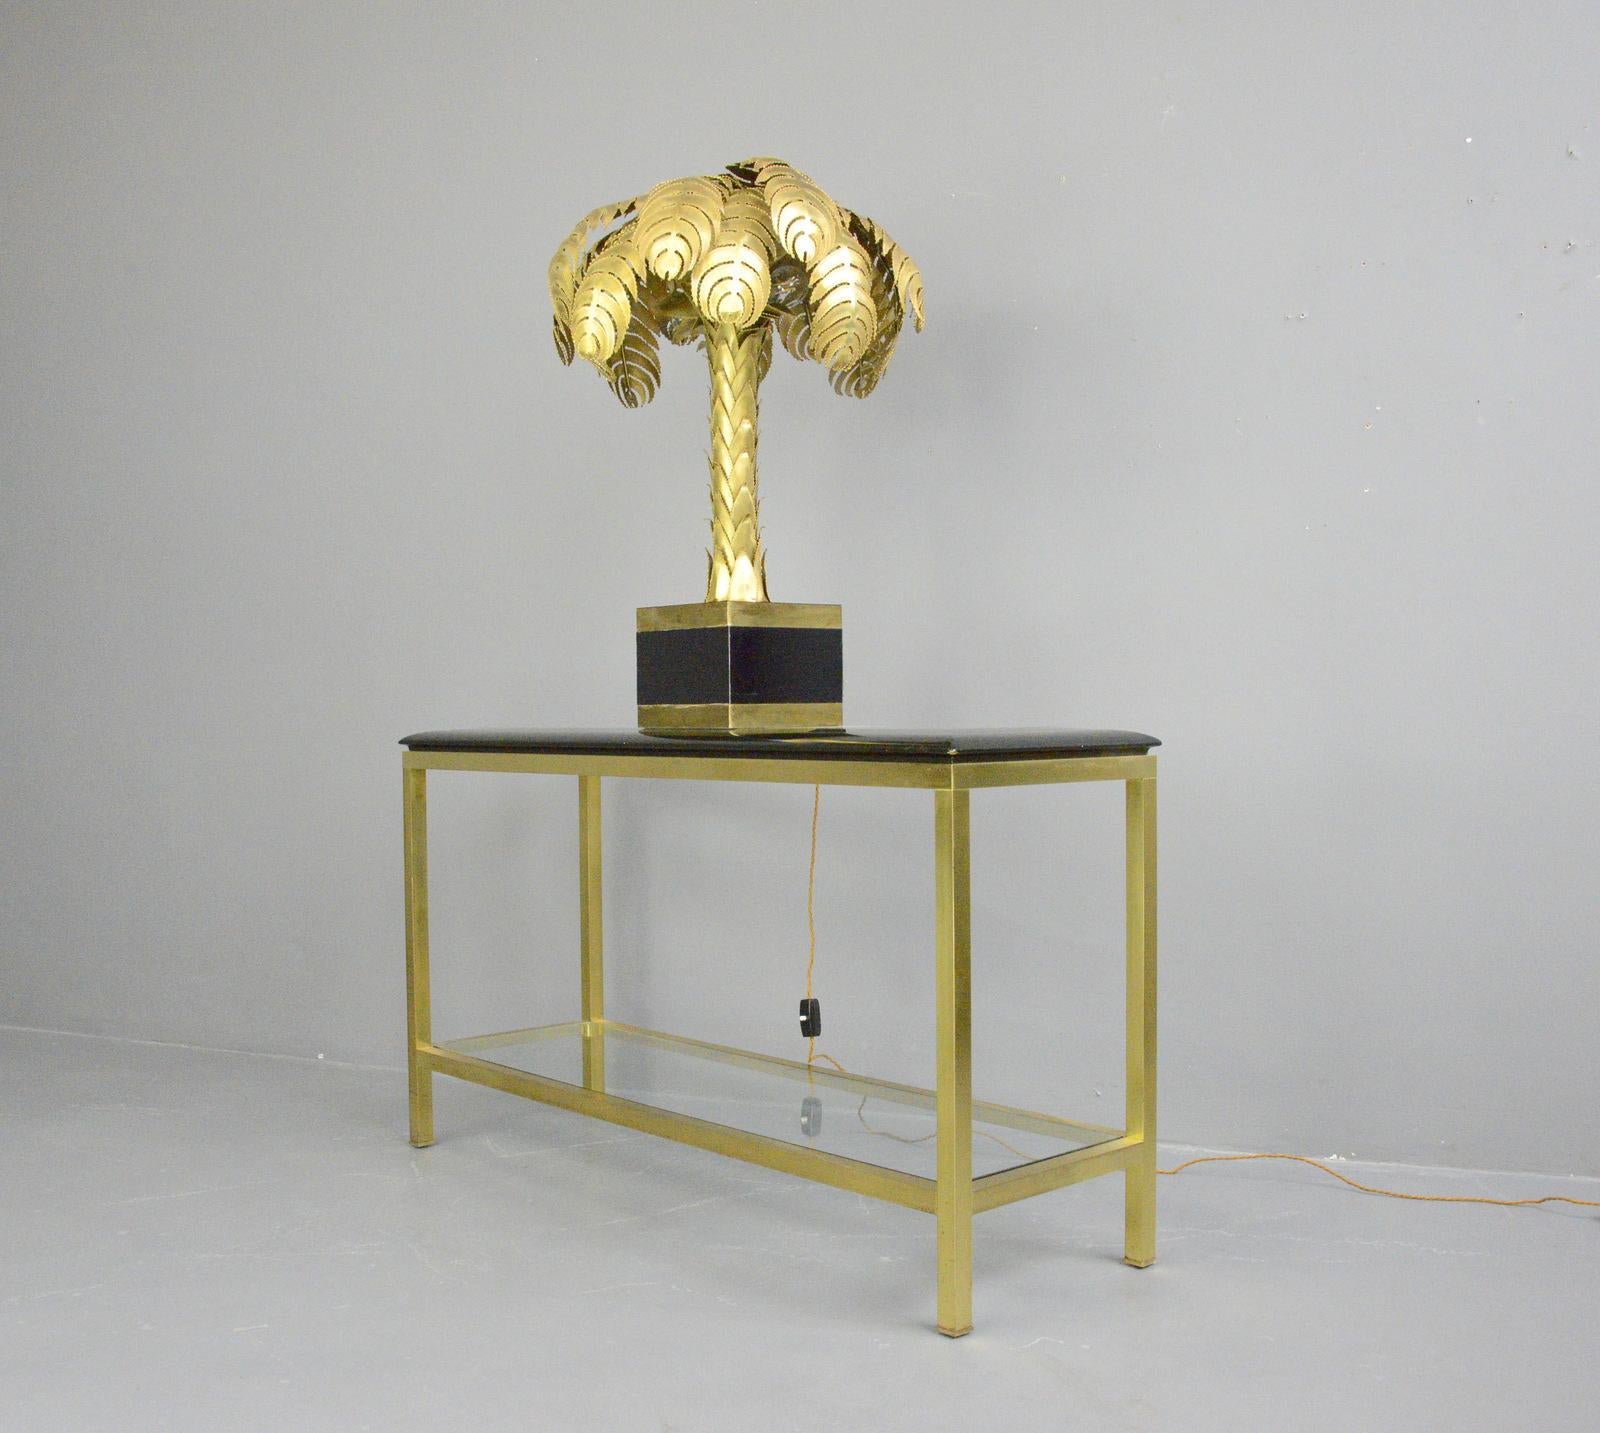 Hollywood Regency console table Circa 1970s

- Brass frame
- Bevelled toughened glass top
- Toughened glass bottom shelf
- French ~ 1970s
- Measures: 131cm long x 41cm deep x 73cm tall

Condition report

Some light scratches to the top and